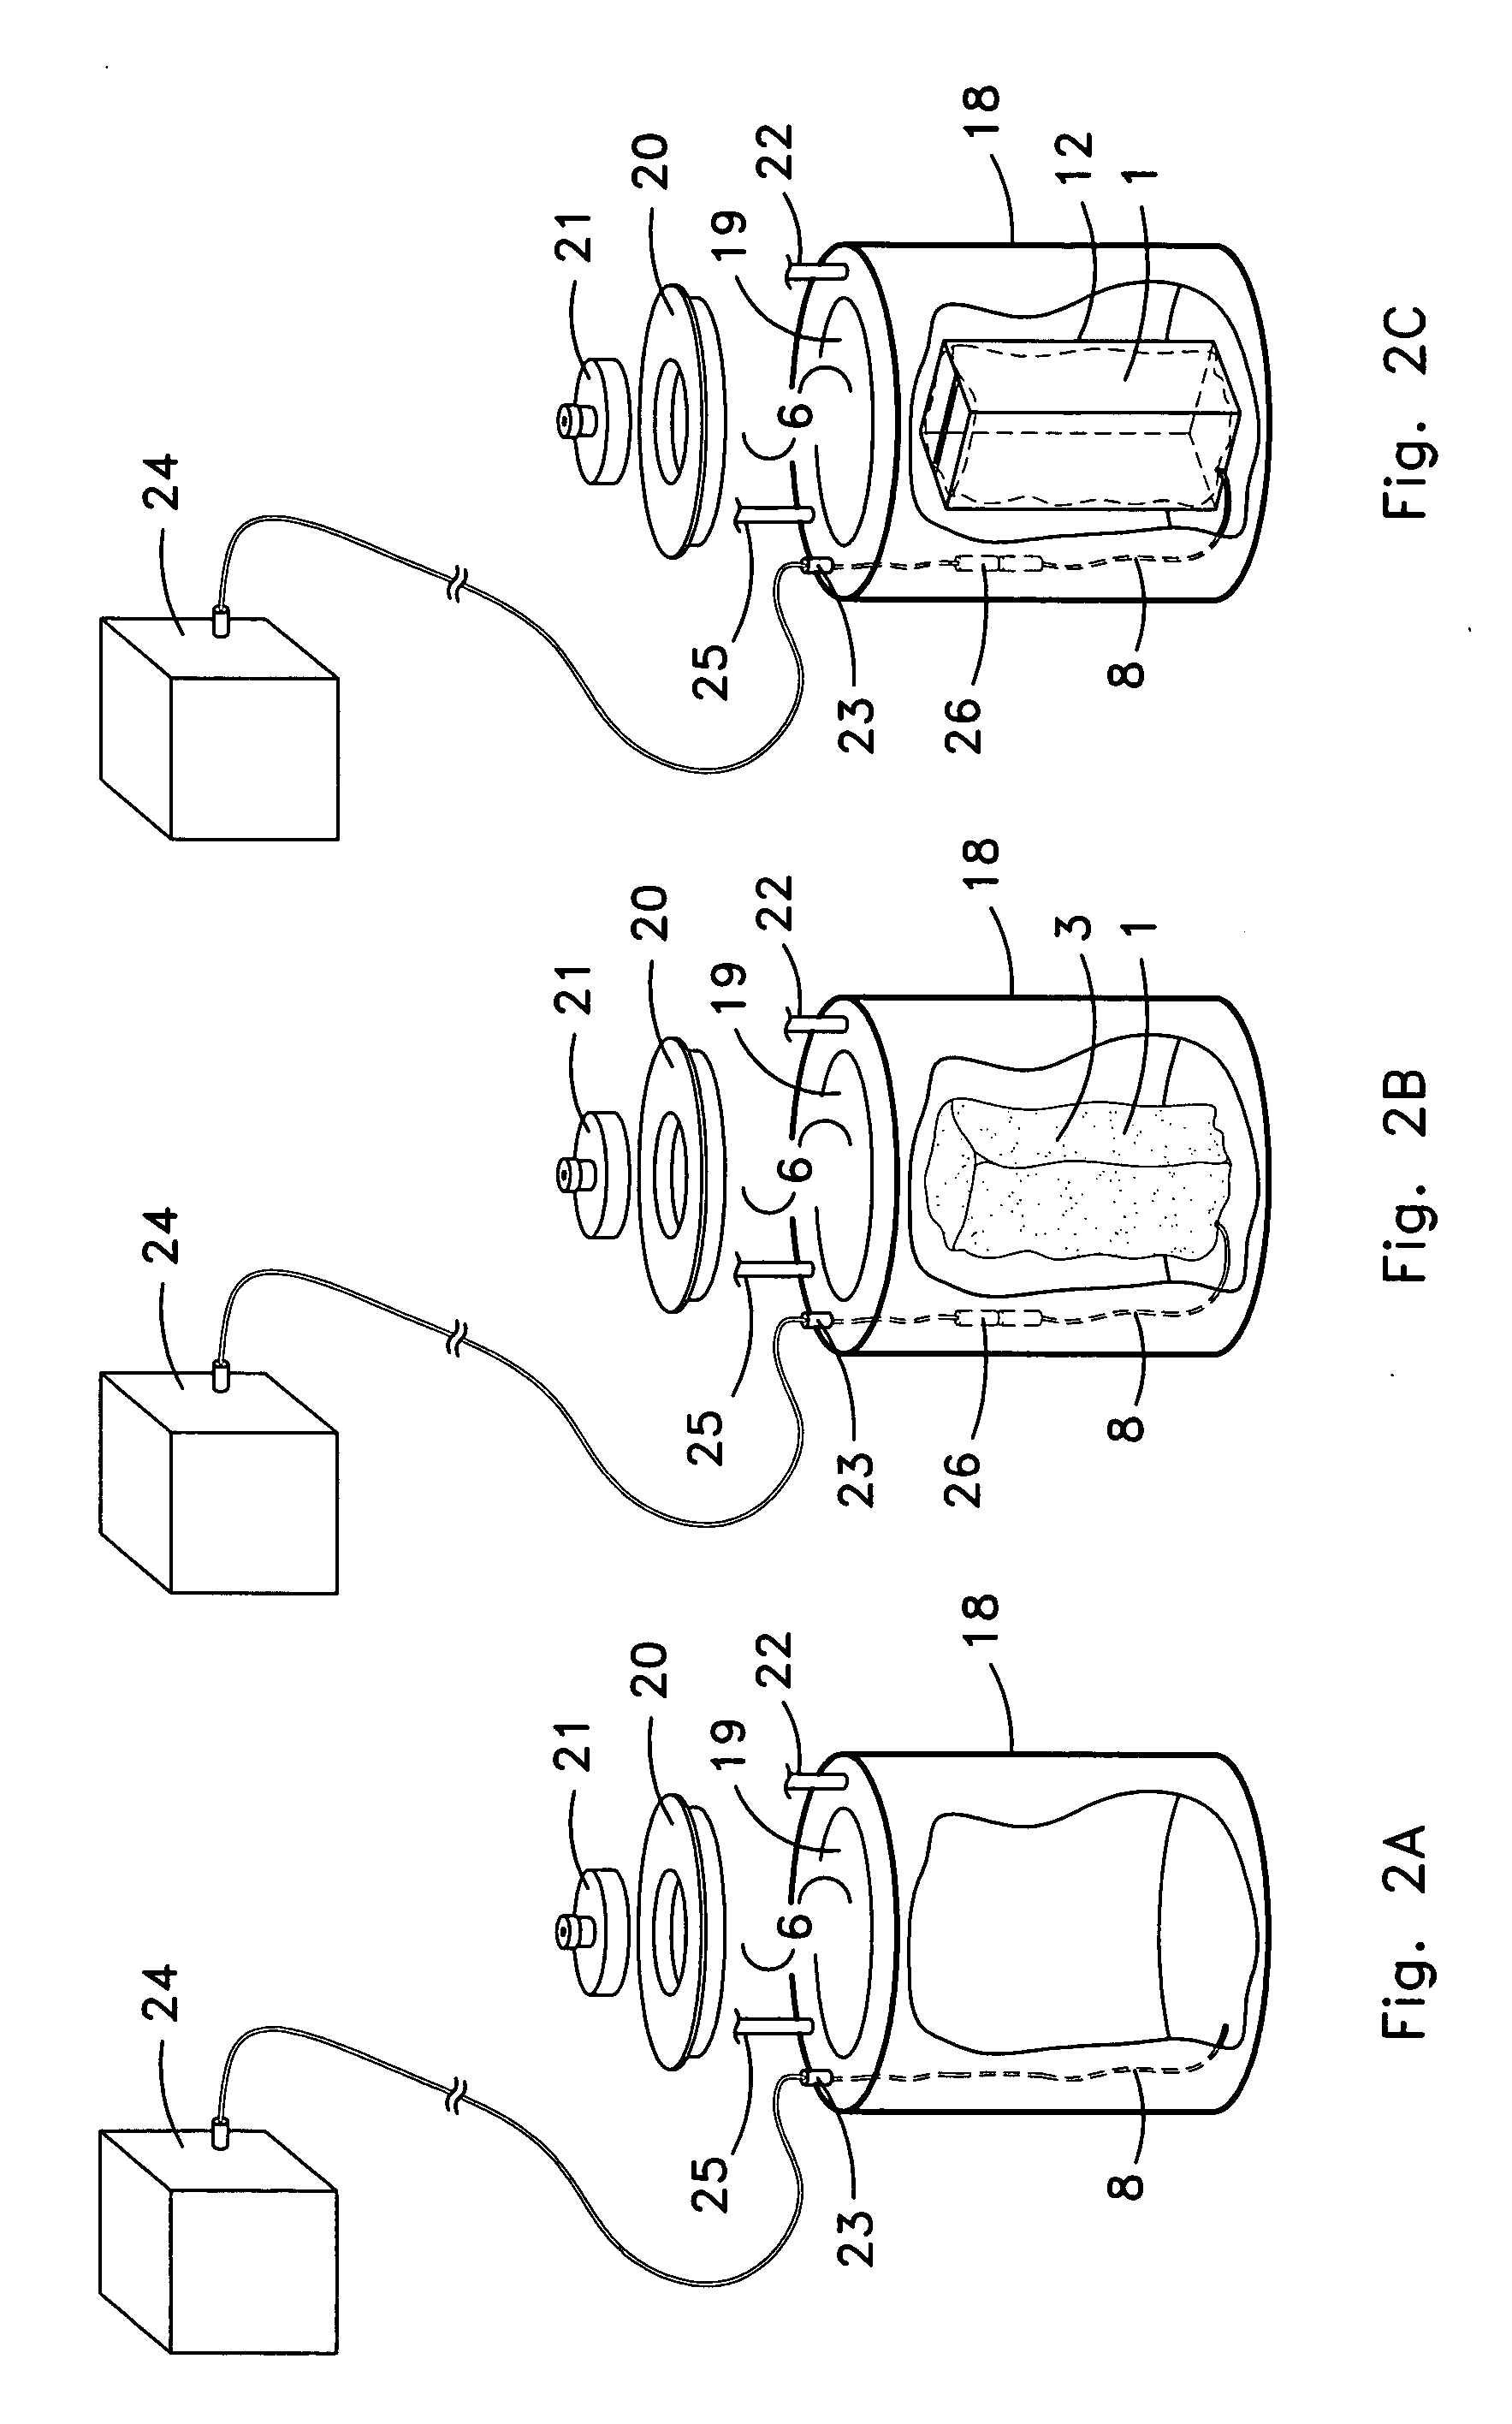 Pressure regulated continuously variable volume container for fluid delivery